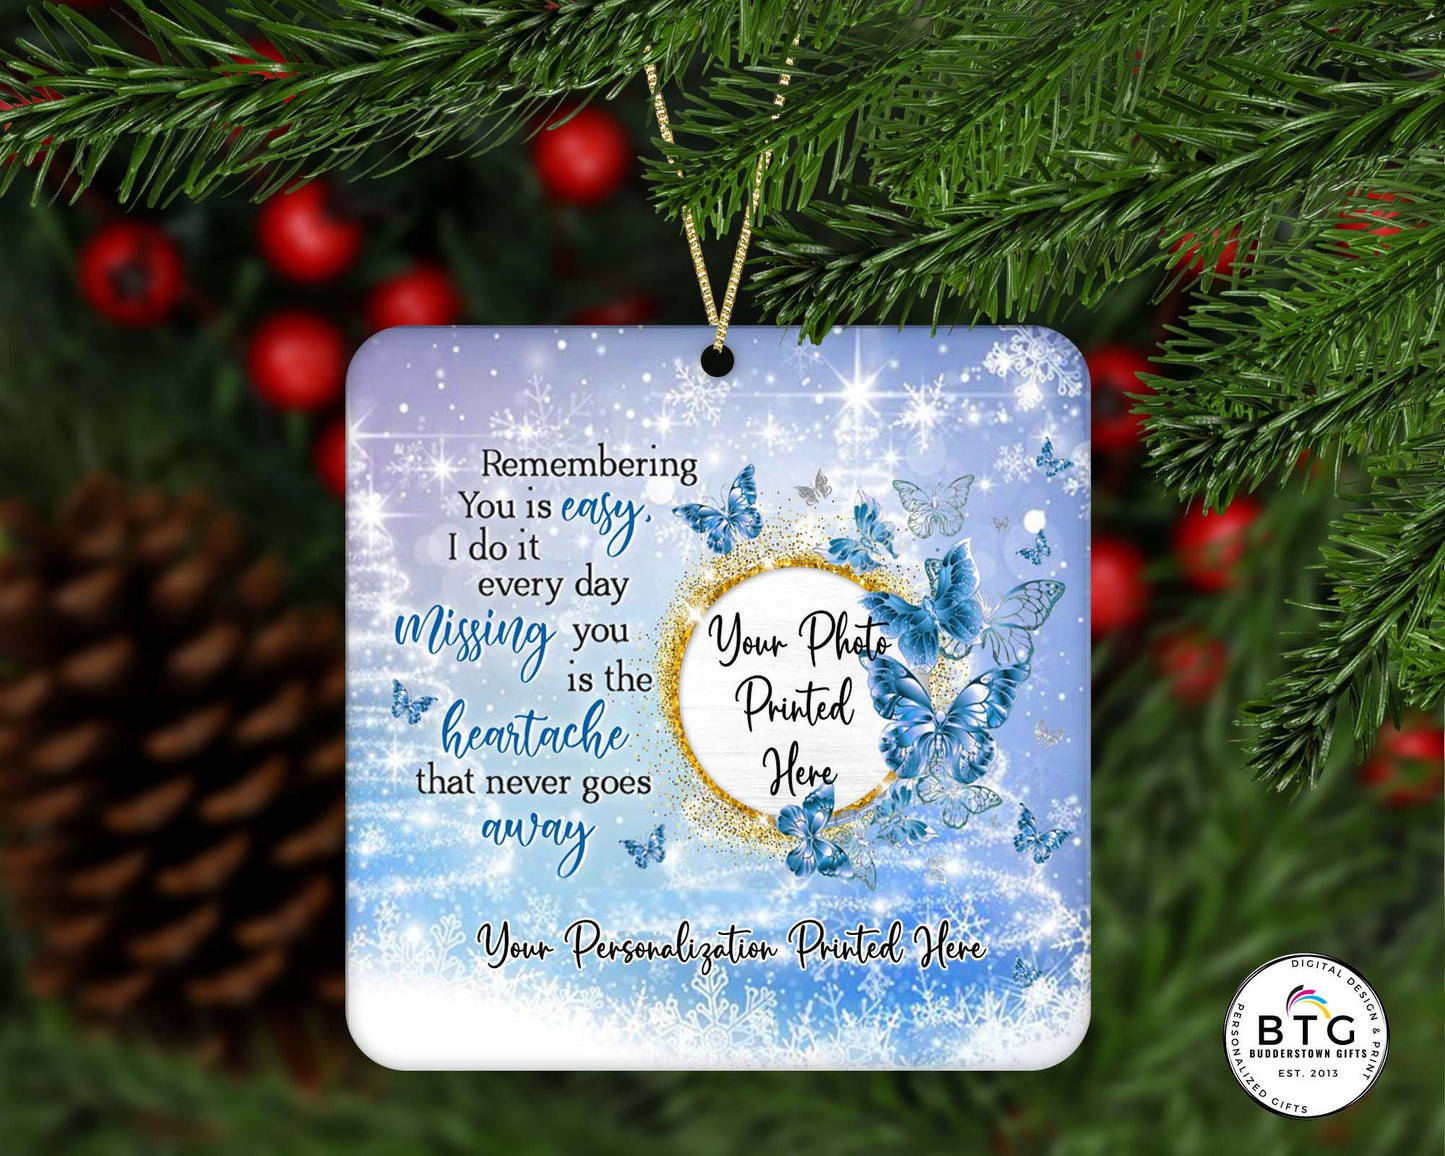 Remembering you is easy Memorial Ornament - Sympathy Ornament, Butterfly ornament, sympathy gift, Personalized Ornament